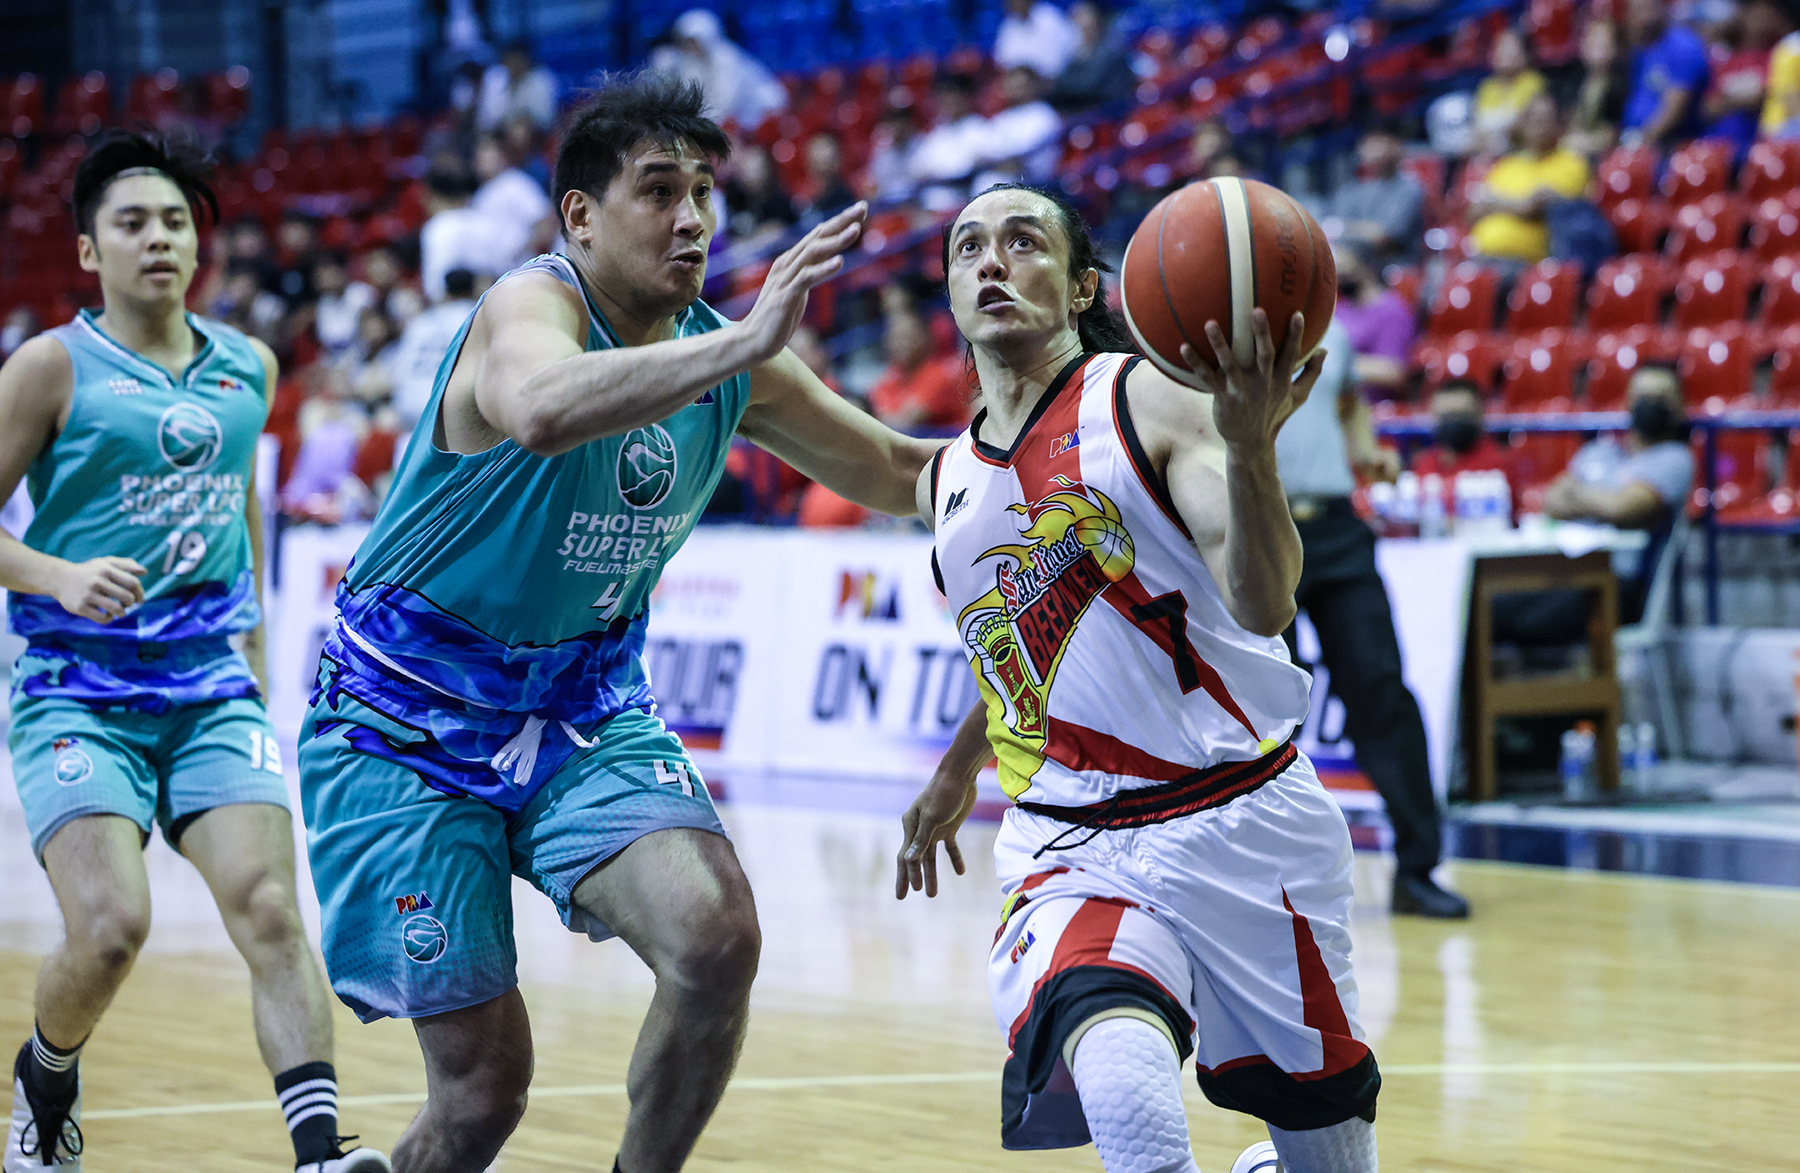 Still a long way back, says Terrence Romeo of return to old form ...